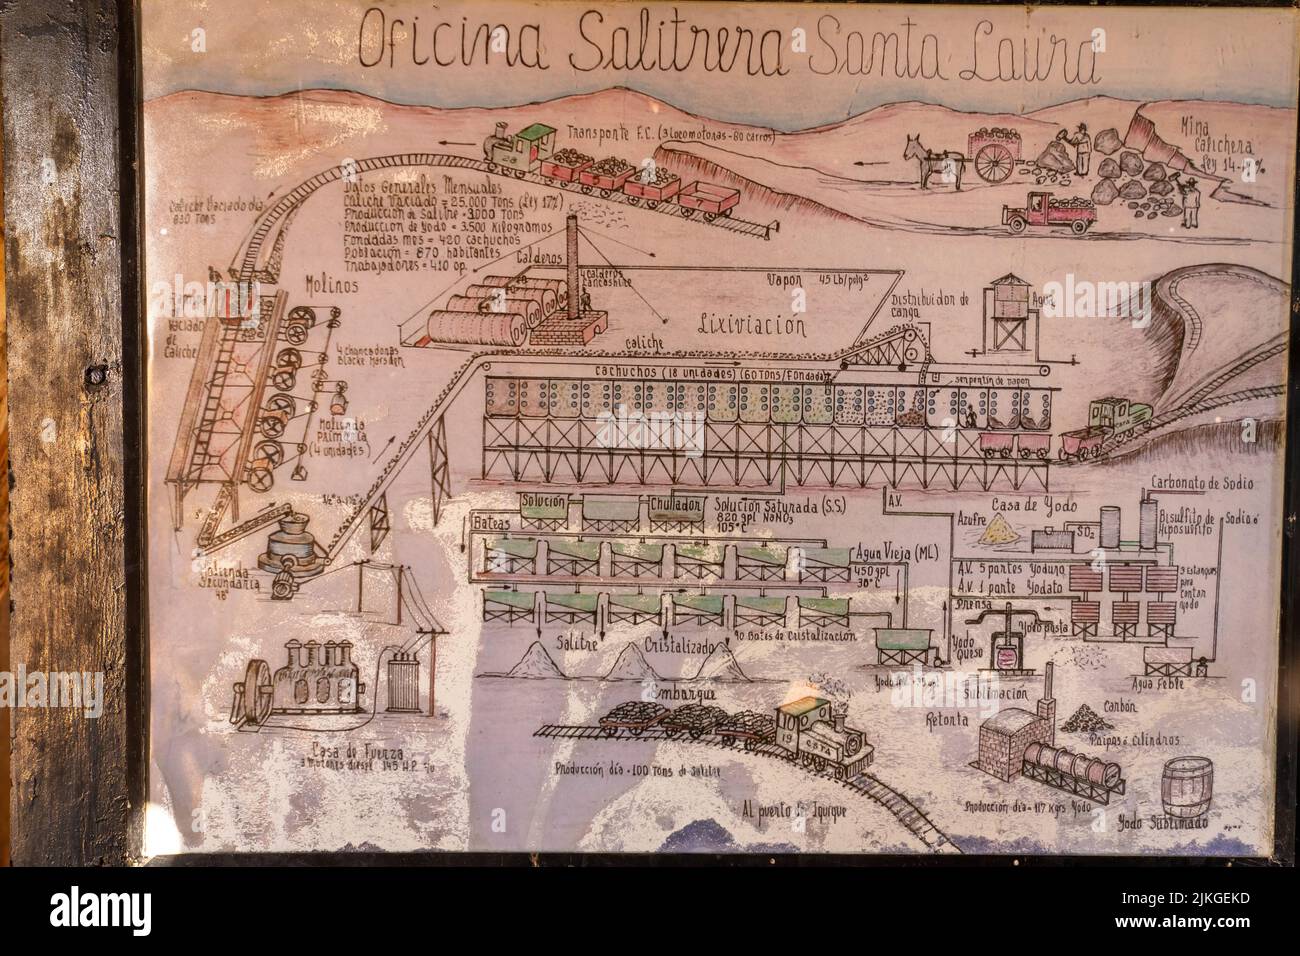 A diagram at the Salitrera Santa Laura showing the Shanks process for refining saltpeter or nitrates.   Humberstone, Chile. Stock Photo